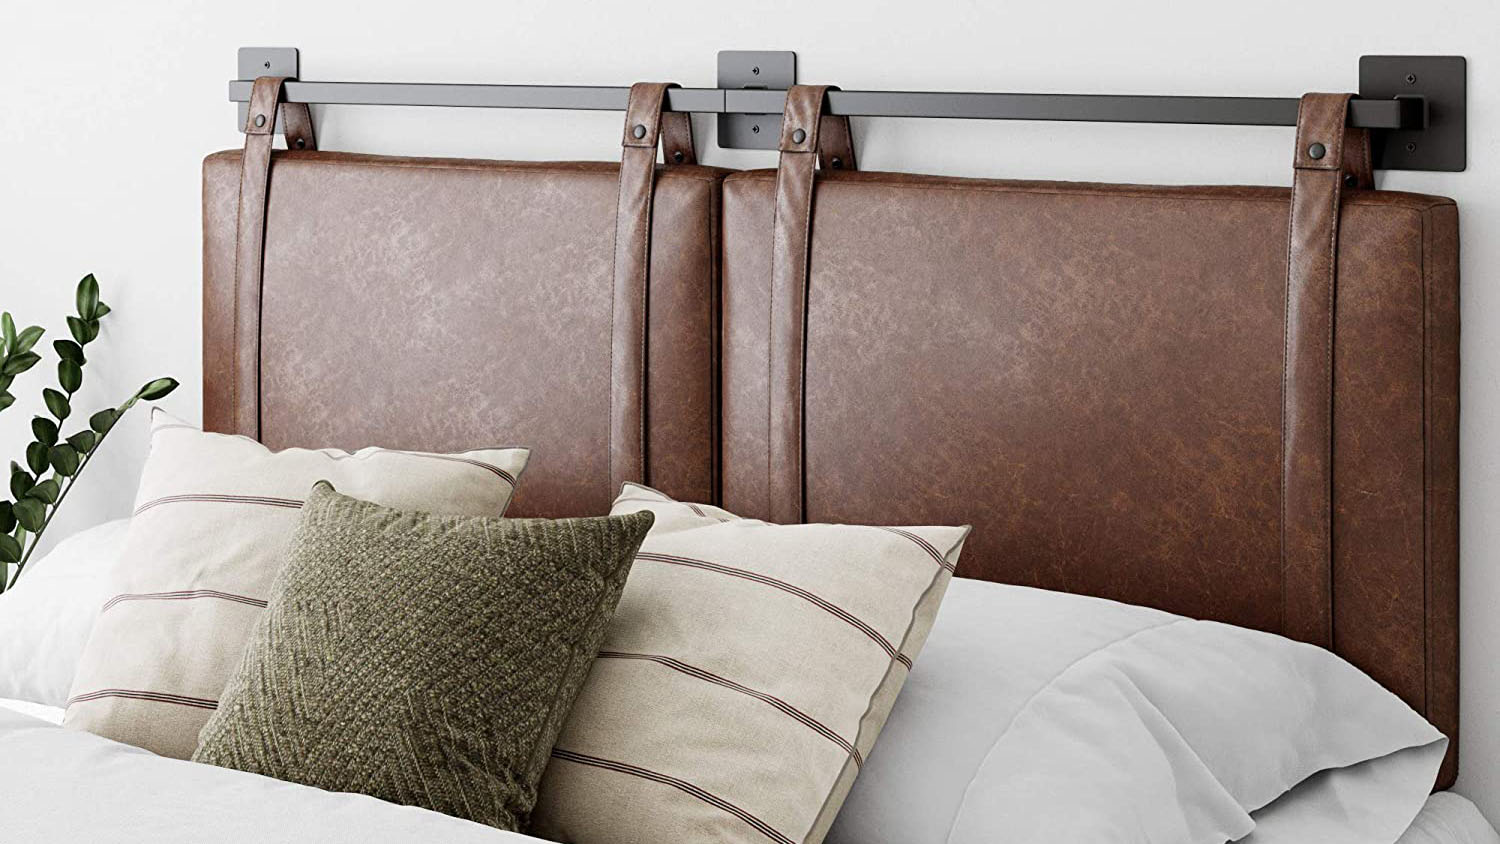 15 Best Headboards For Adjustable Beds, Can You Have A Headboard With An Adjustable Bed Frame